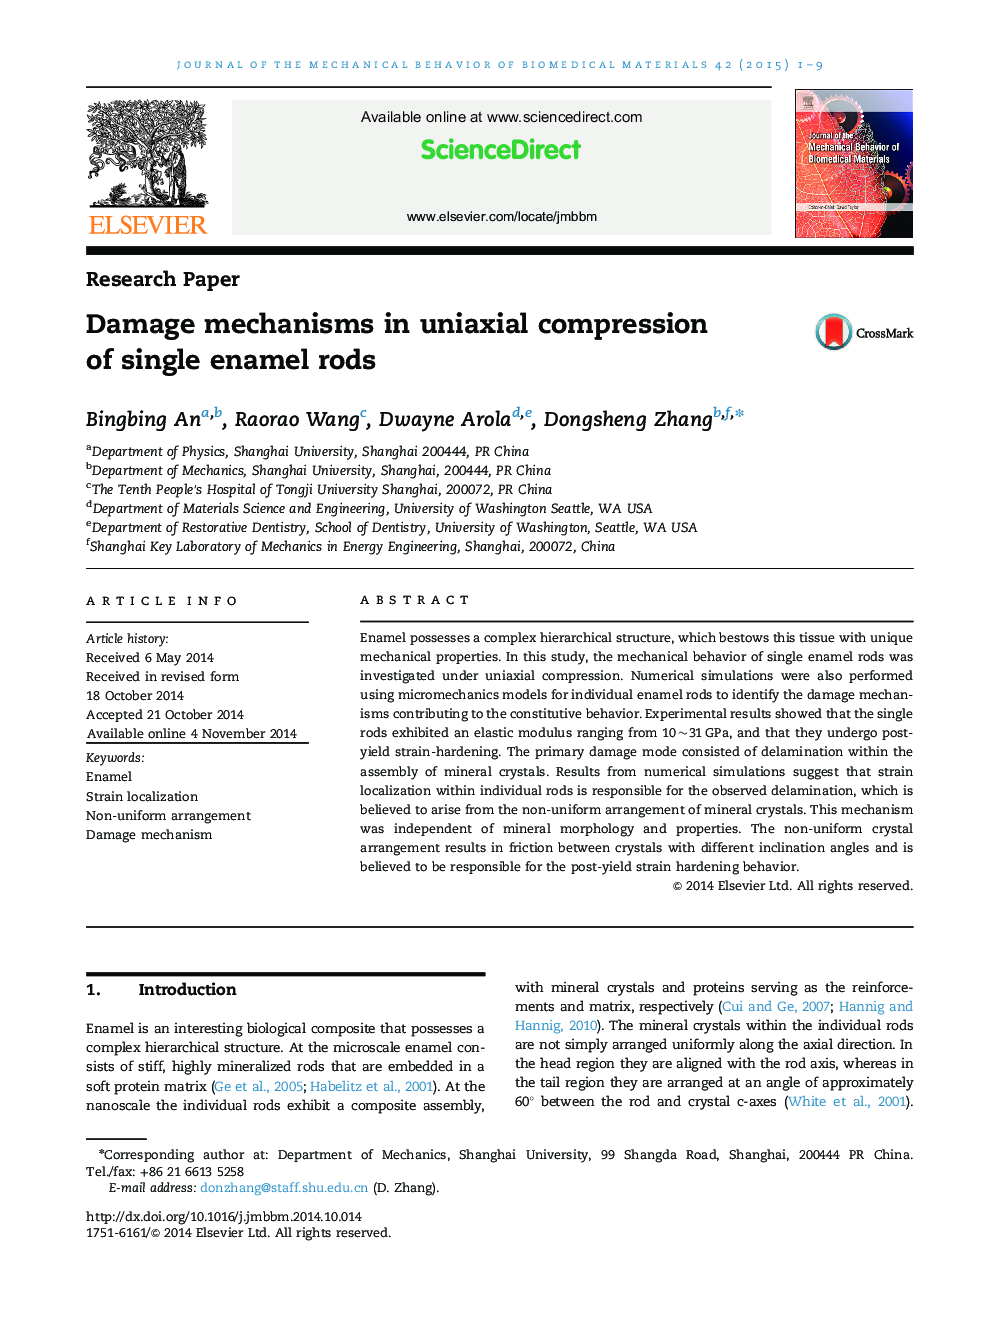 Damage mechanisms in uniaxial compression of single enamel rods